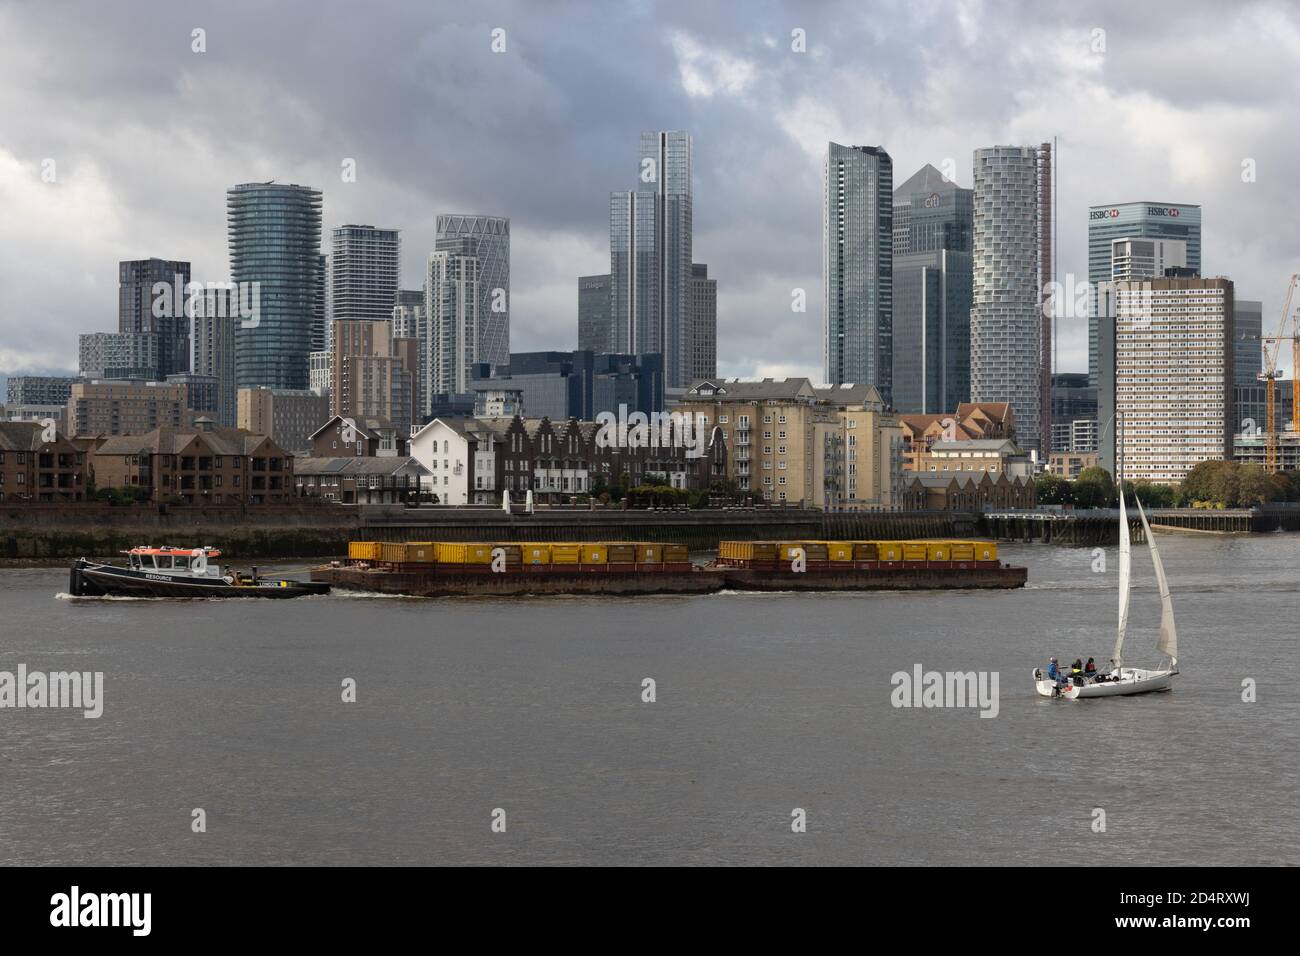 Cargo vessels and sailing boat with Canary Wharf in background, London UK Stock Photo